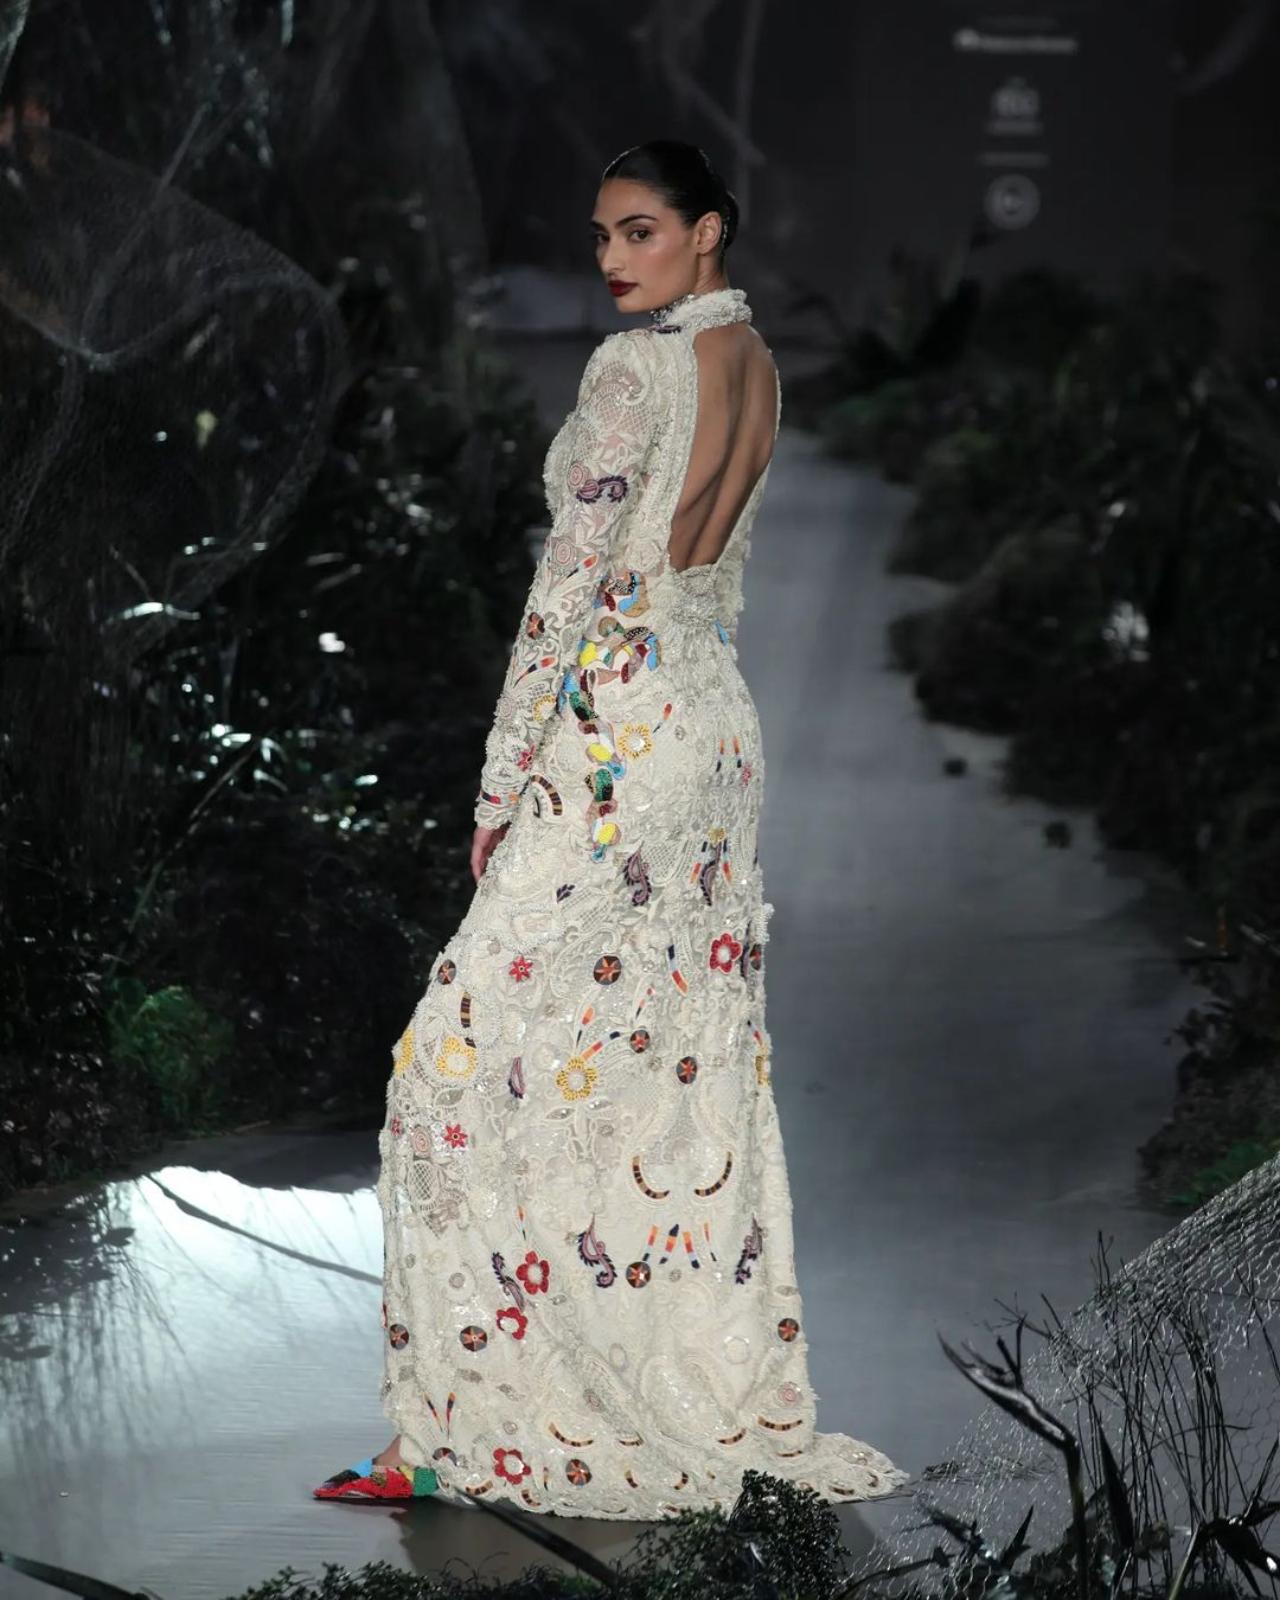 Athiya Shetty chose to wear an intricately embroidered cream dress with long sleeves, enhanced by stunning jewellery and towering heels. Her ravishing look was completed with a chic bun and sophisticated makeup